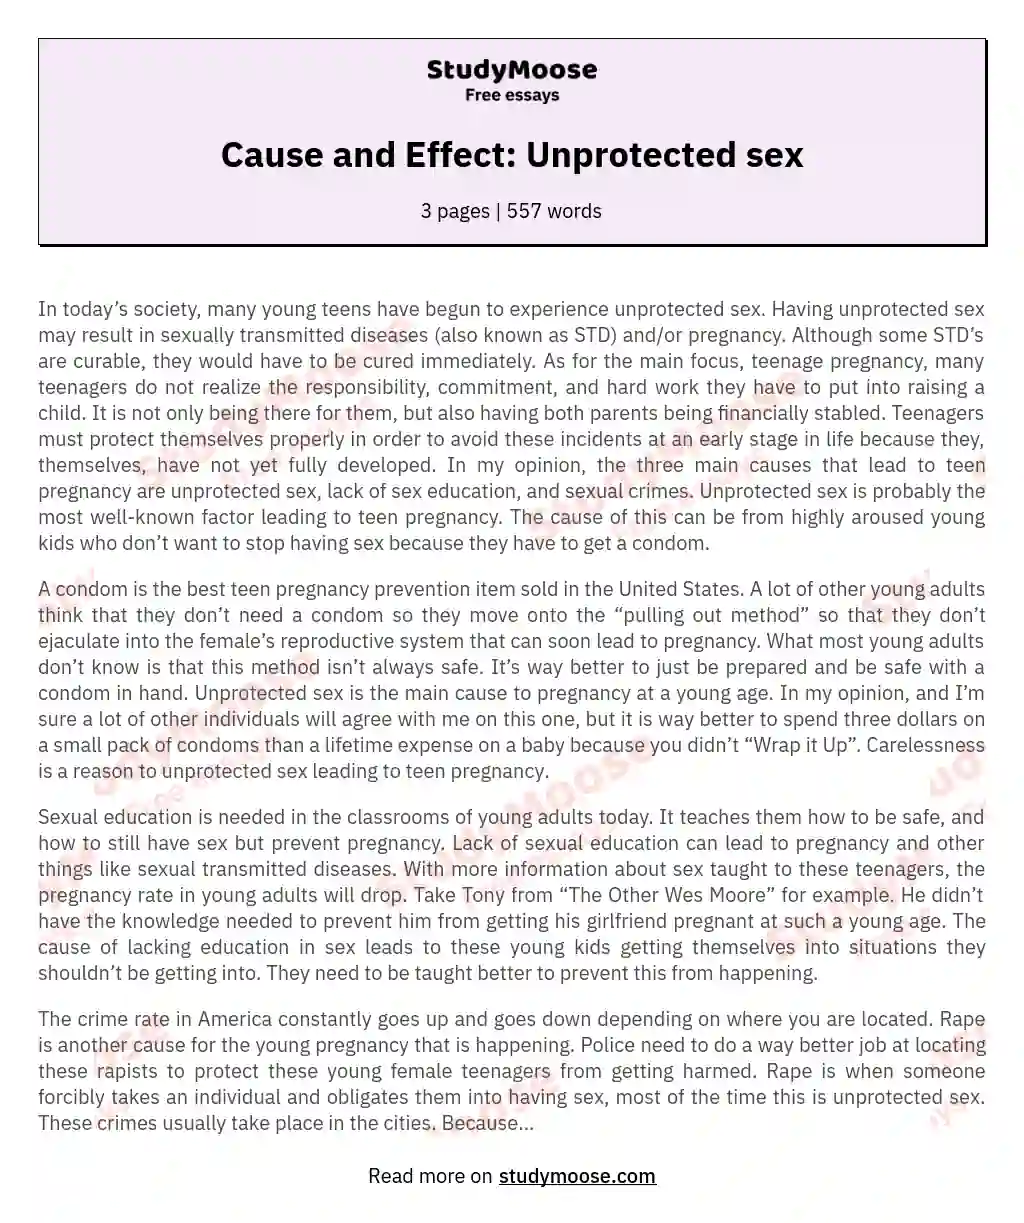 Cause and Effect: Unprotected sex essay